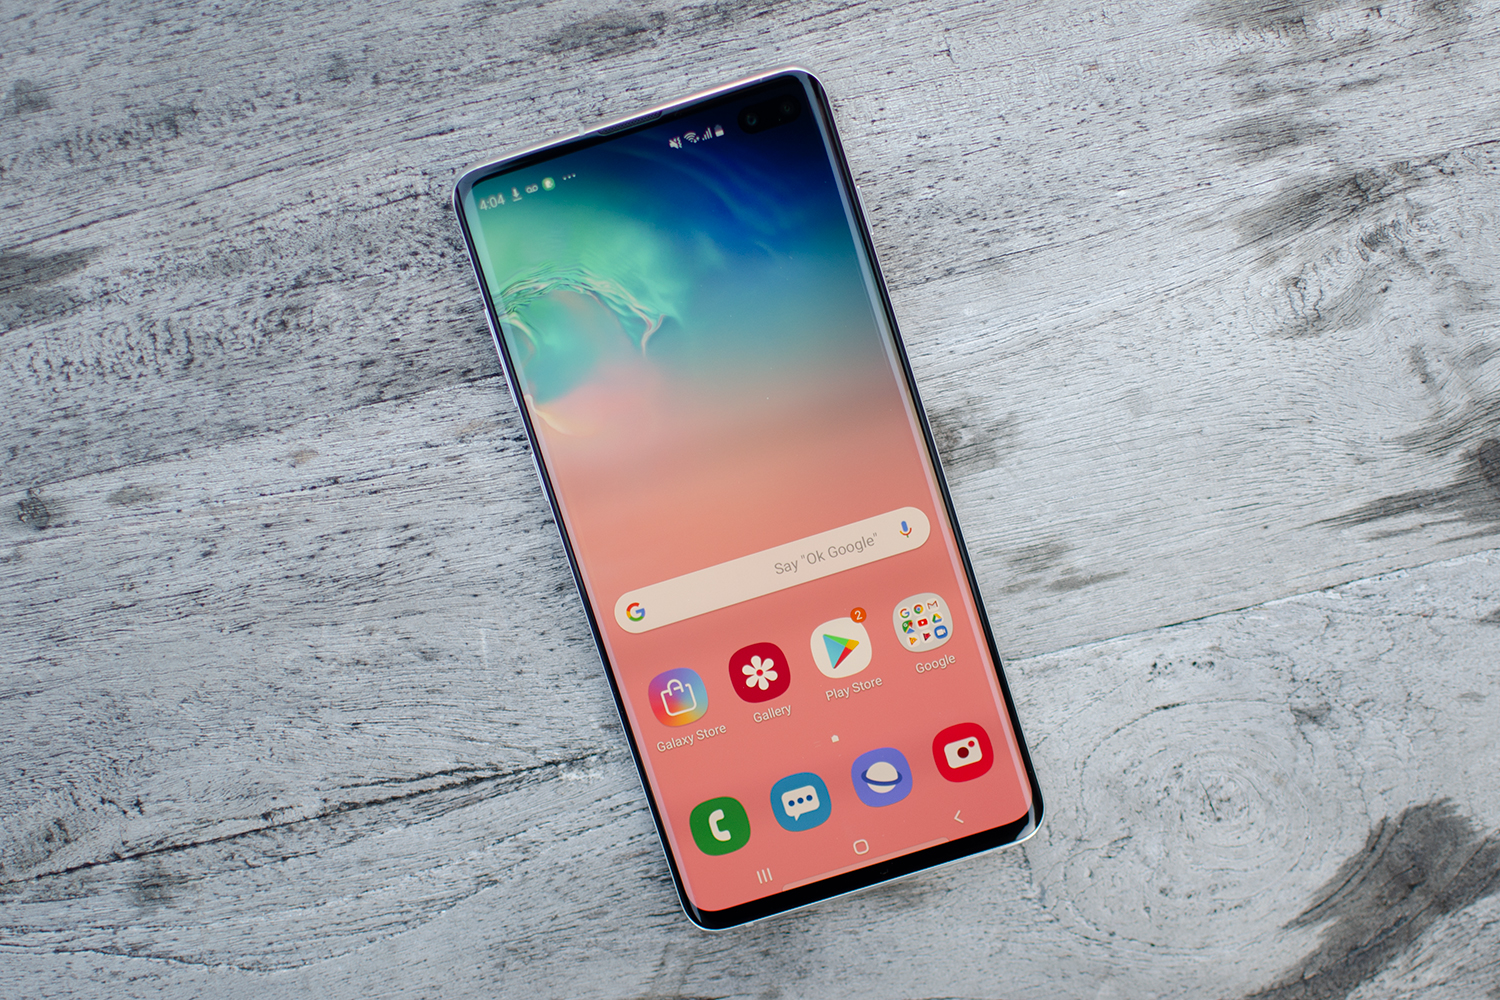 Samsung Galaxy S10 Plus Review: Everything You'll Want (and More)